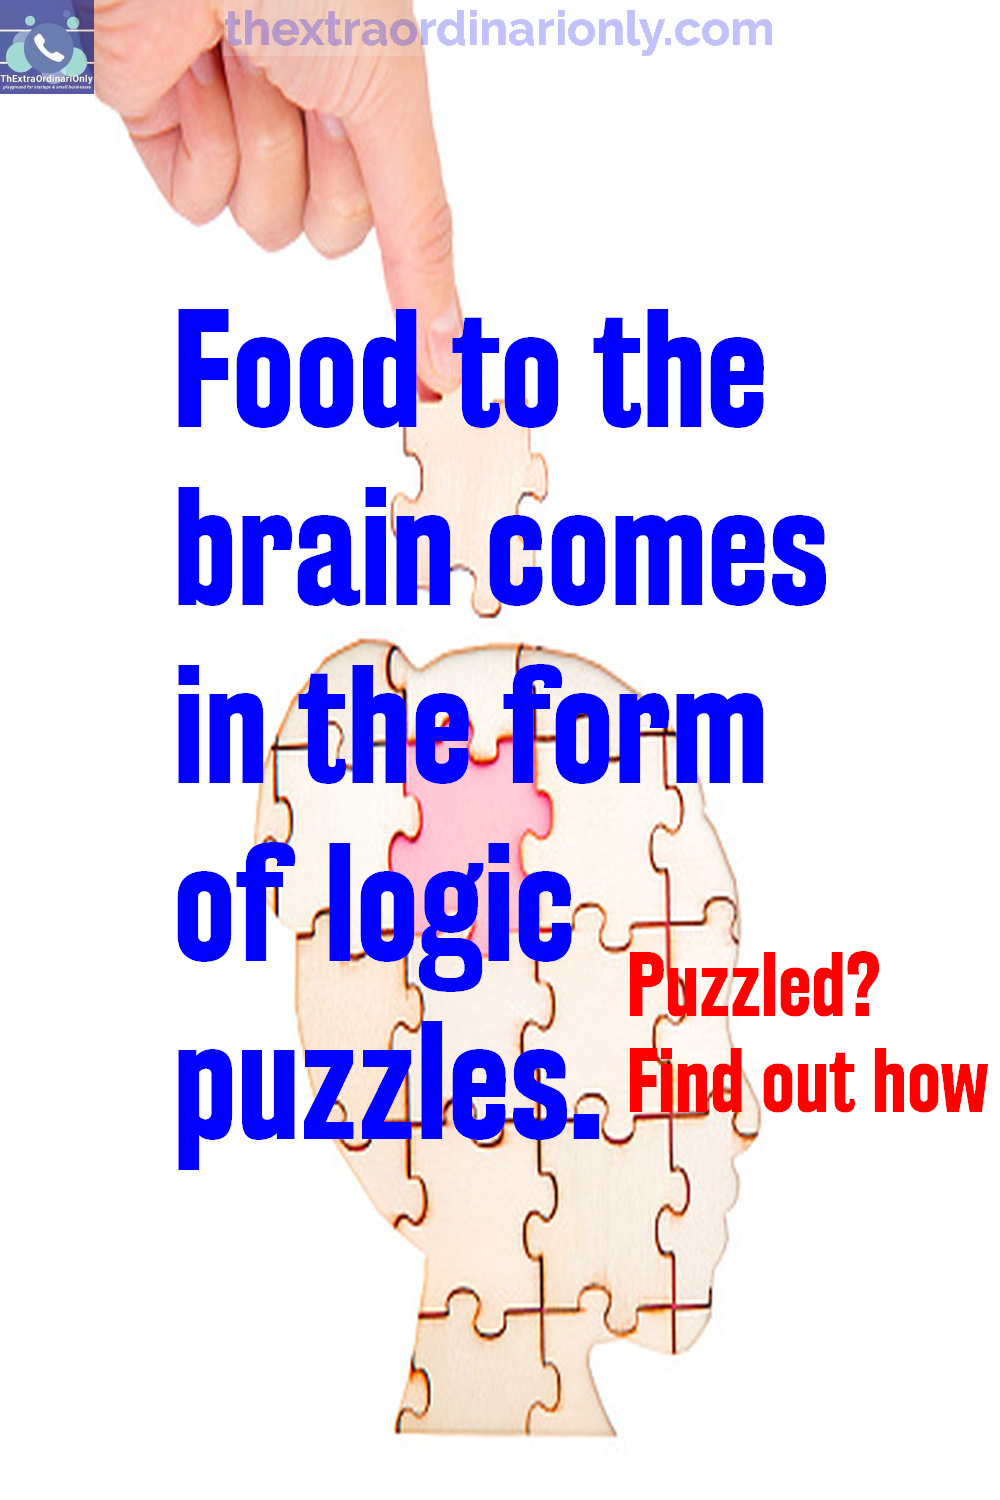 food to the brain comes in the form of logic puzzle games